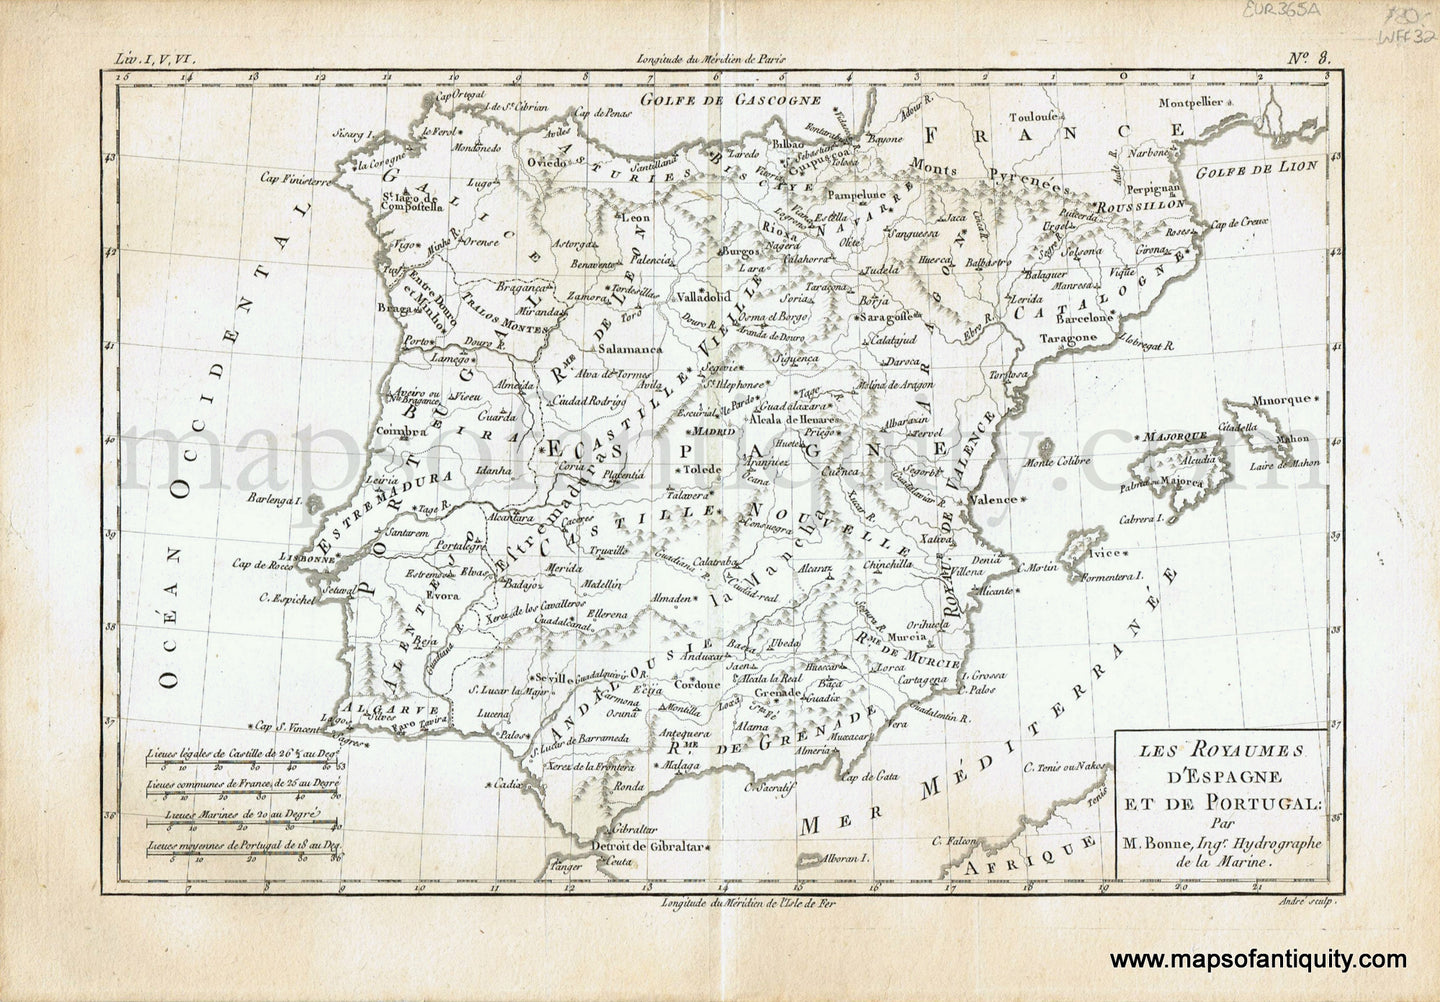 Hand-Colored-Engraved-Antique-Map-Les-Royaumes-d'Espagne-et-de-Portugal.-Europe-Spain-and-Portugal-1780-Raynal-and-Bonne-Maps-Of-Antiquity